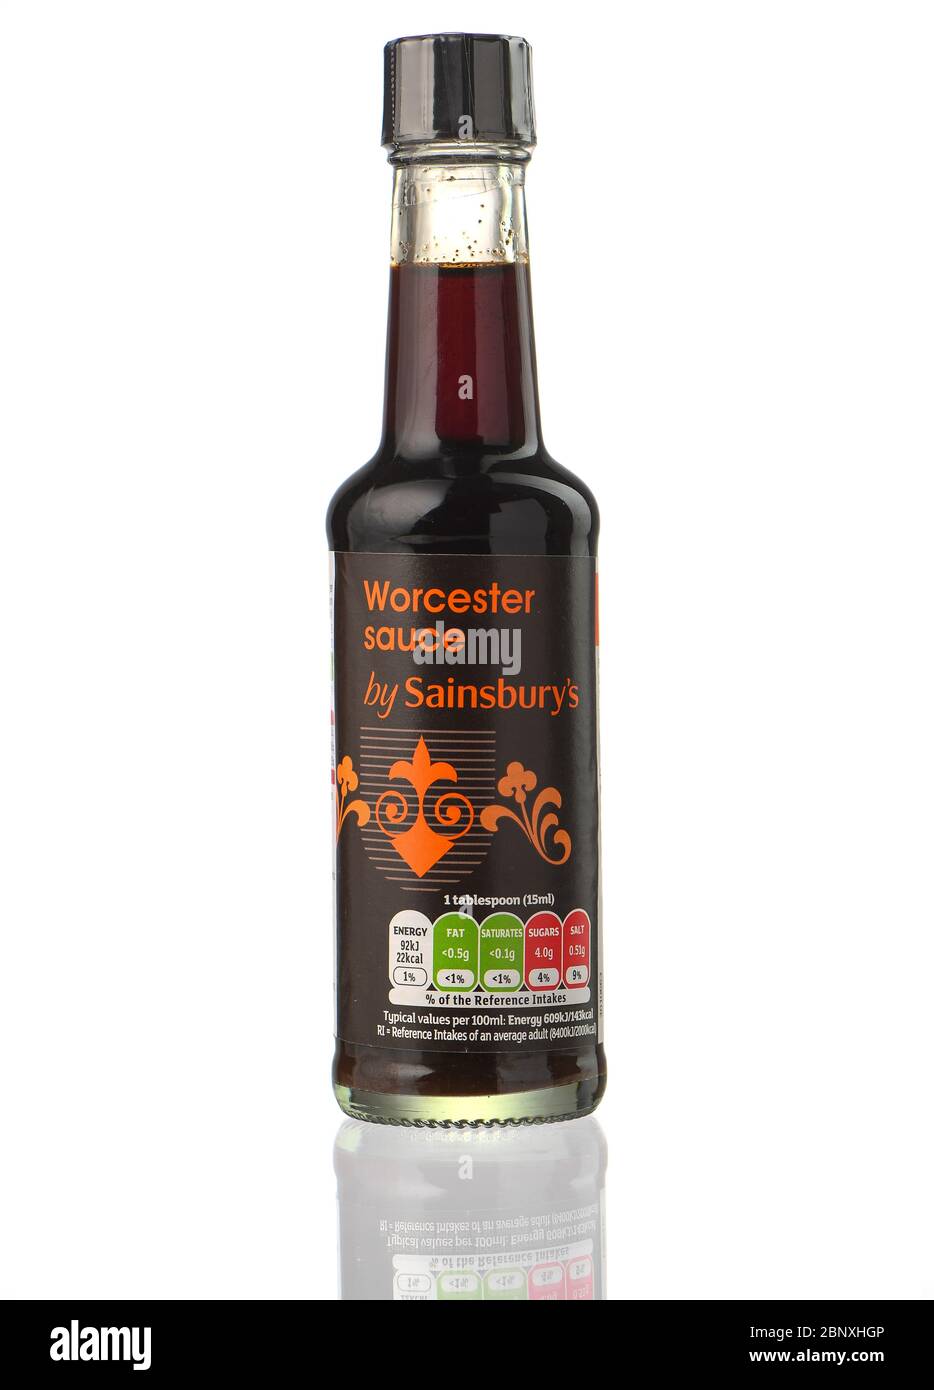 Sainsburys brand of bottled Worcester sauce isolated against a white background Stock Photo